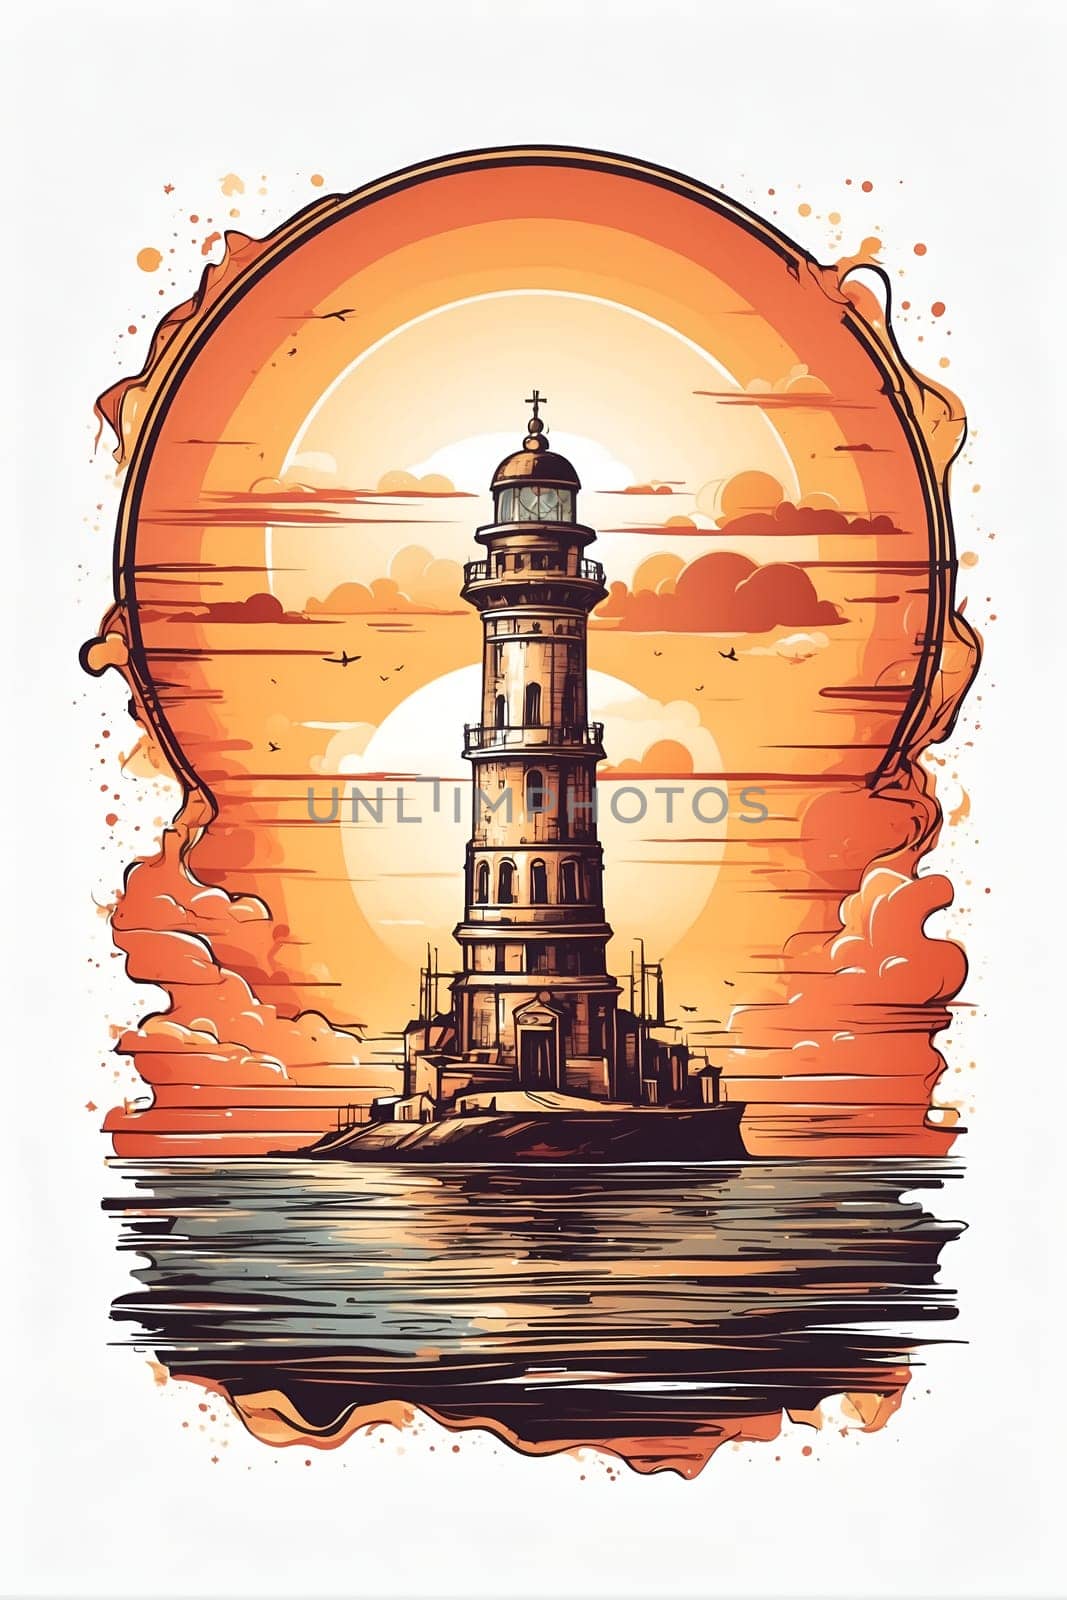 A detailed illustration capturing a lighthouse against a beautiful sunset backdrop.